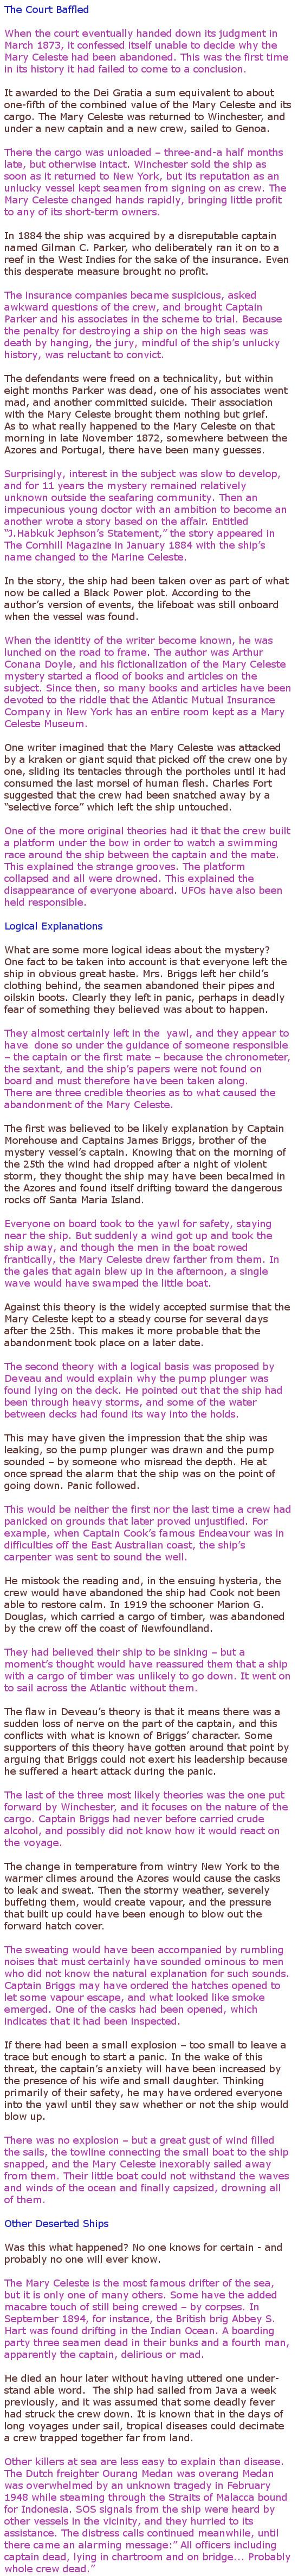 Mysteries of the sea